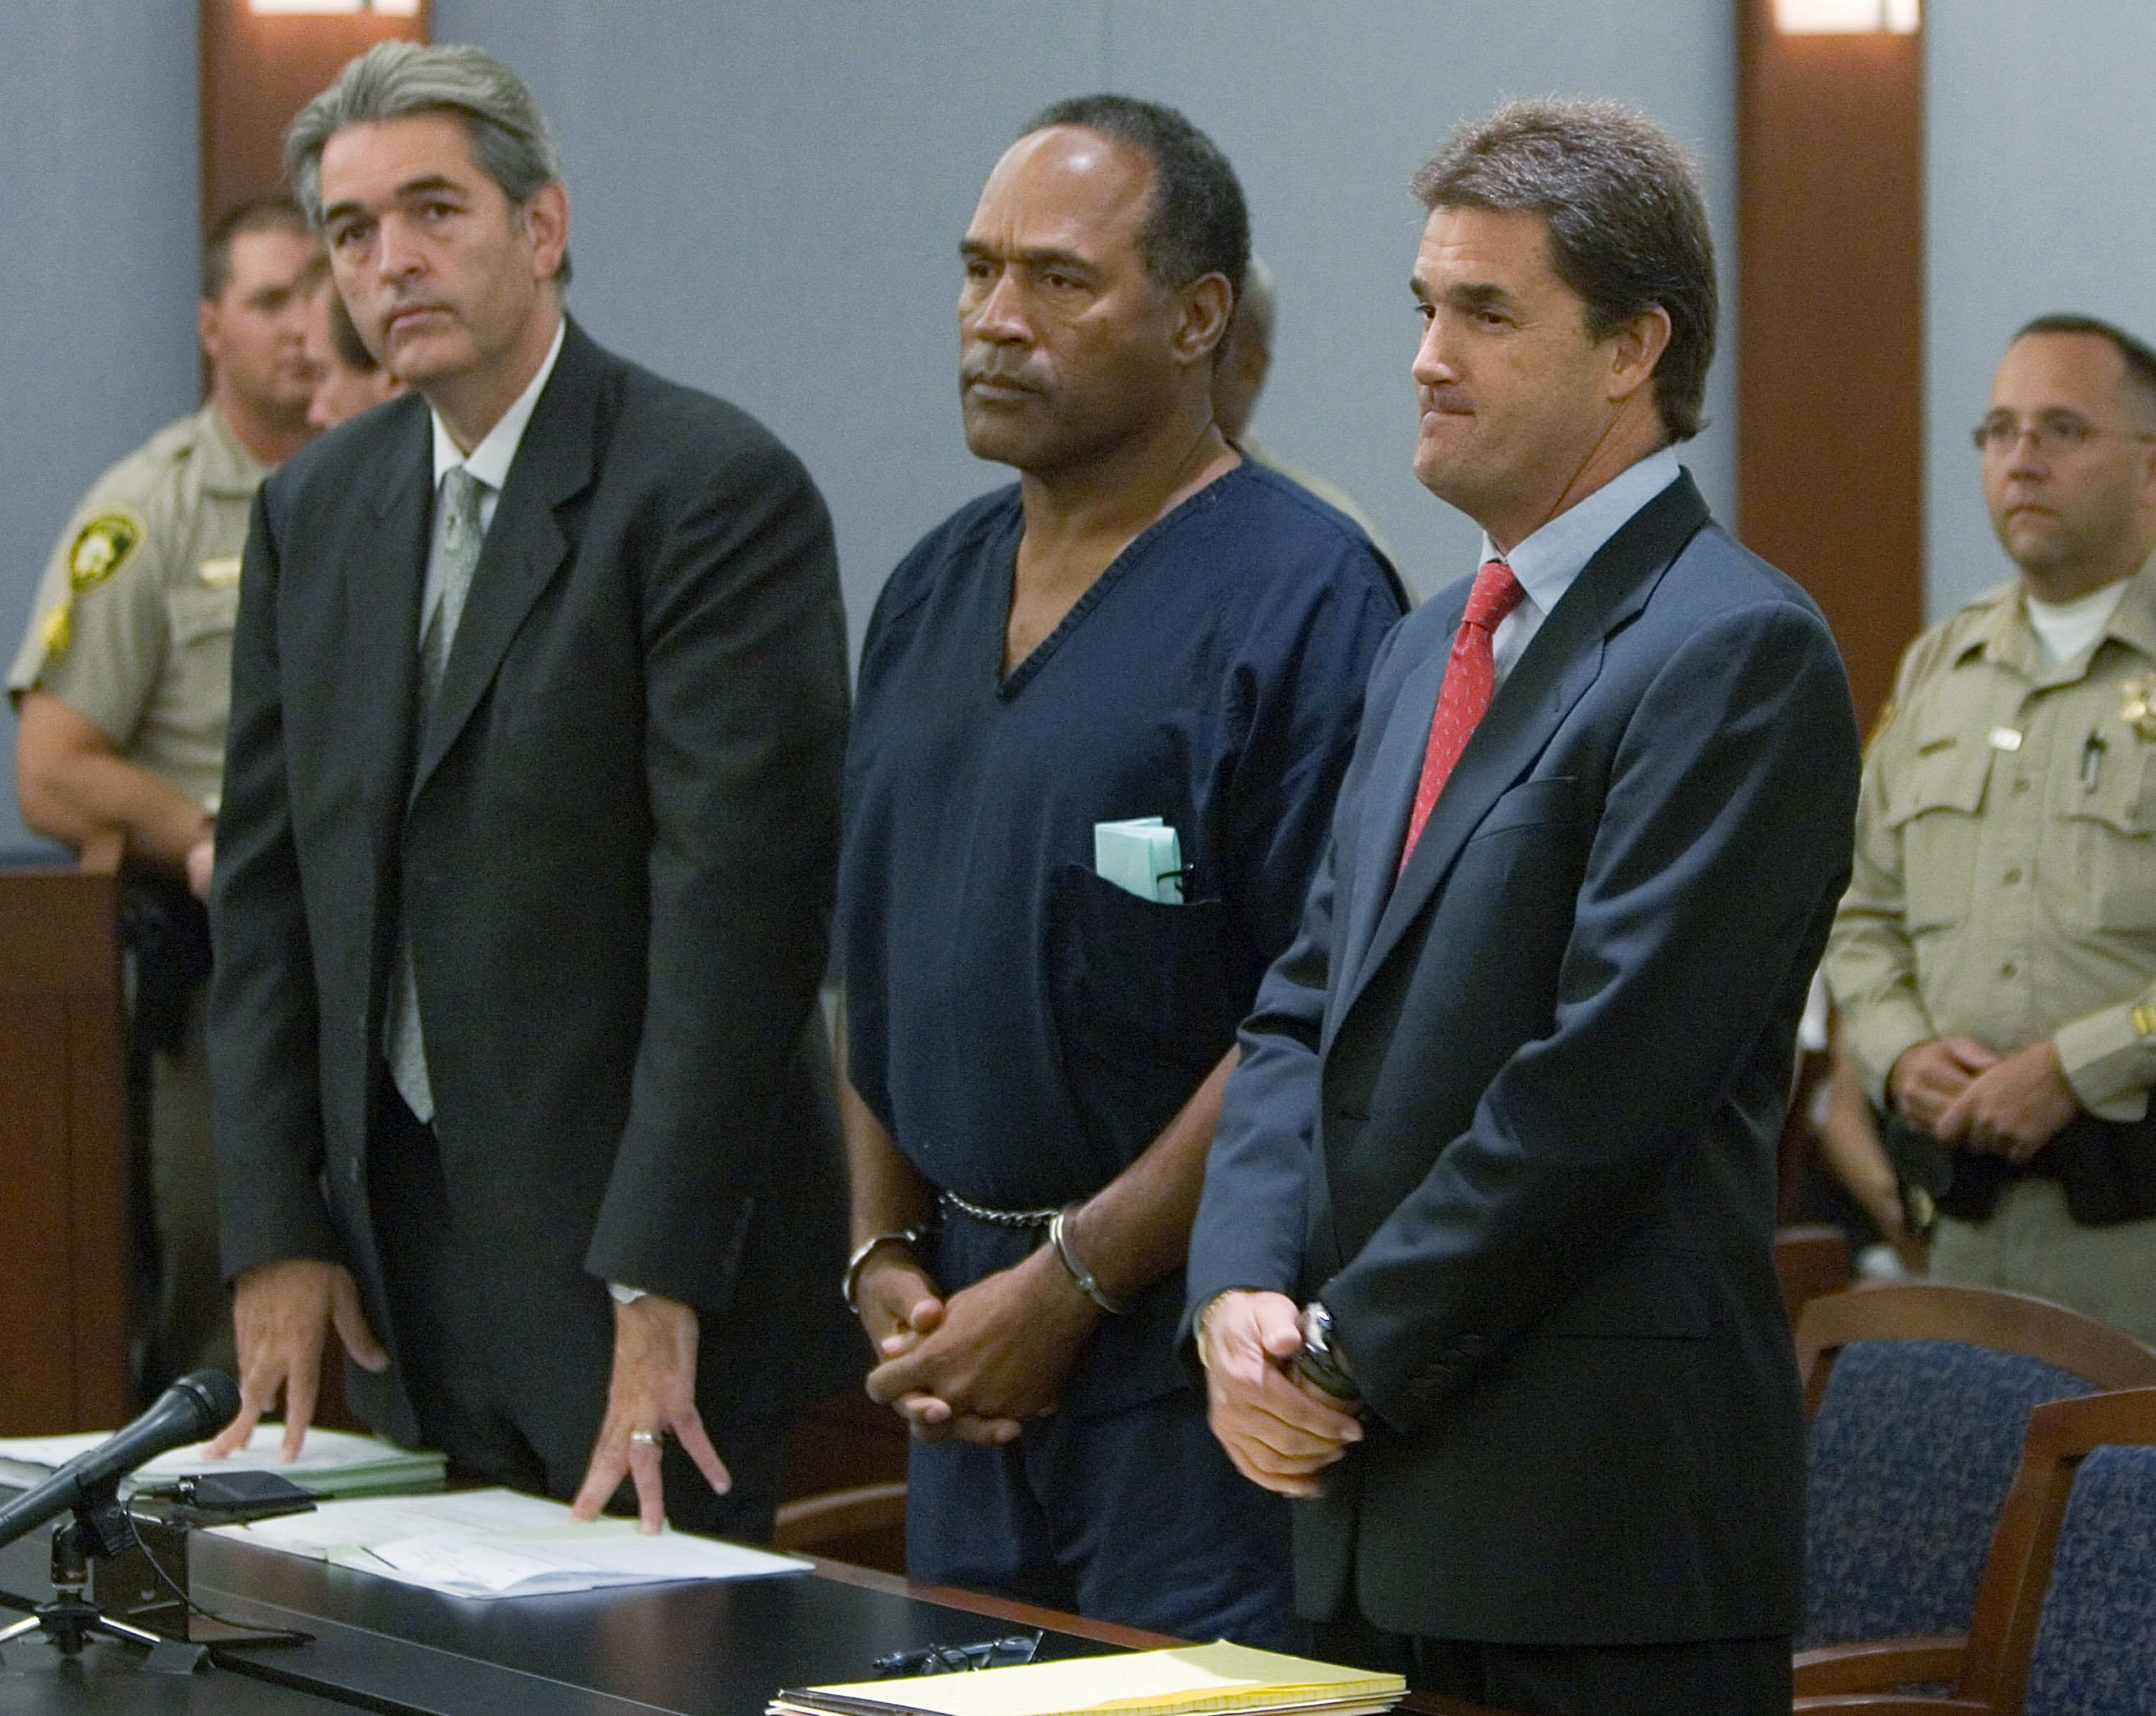 O.J. Simpson, center, appears in court on charges which include kidnapping, armed robbery and assault, in Las Vegas, Nevada, in September 2007. 